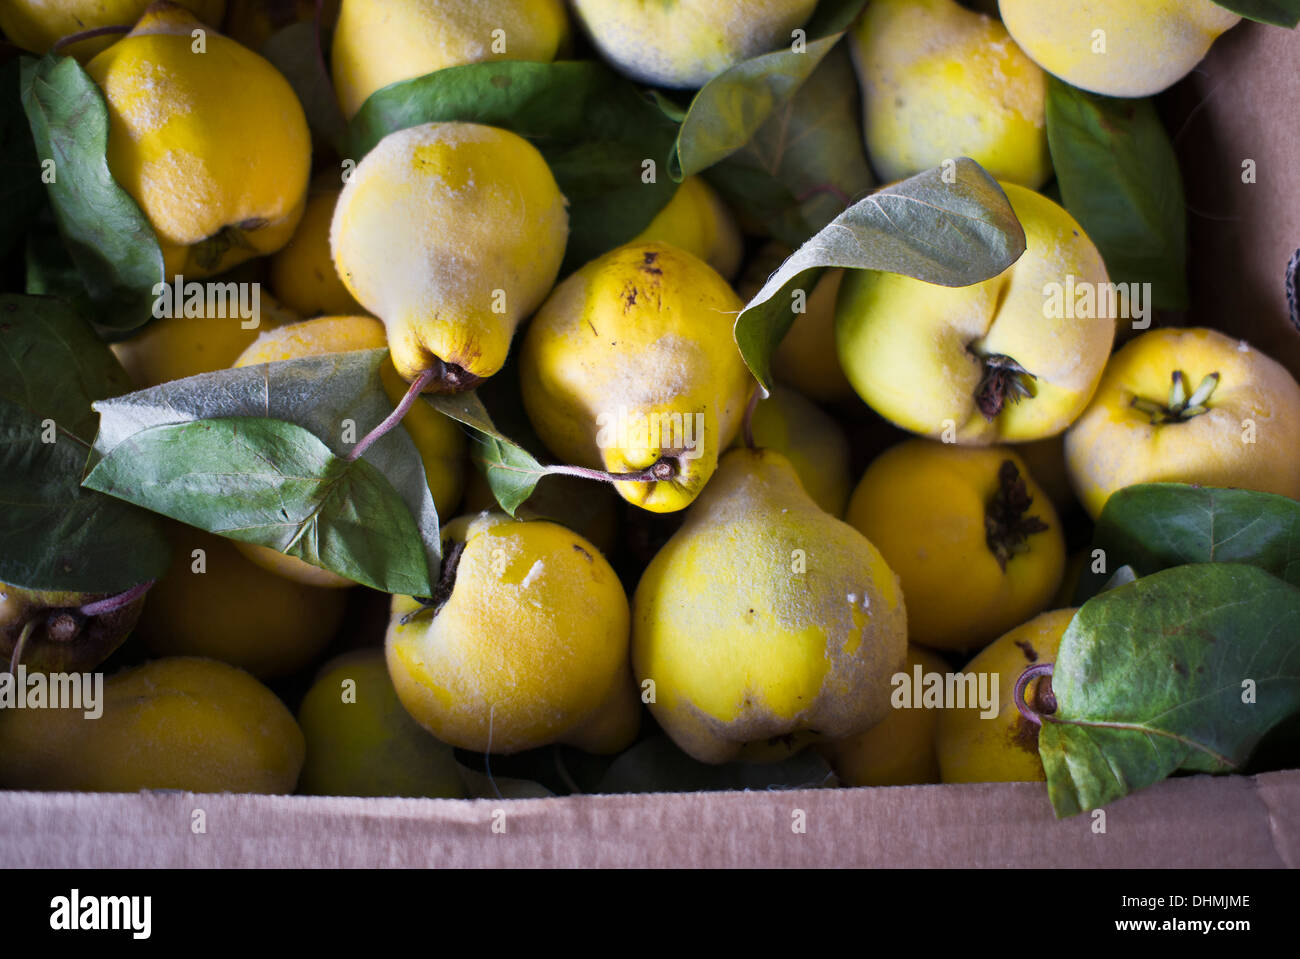 Box of harvested quince fruit ready for processing into jelly Stock Photo